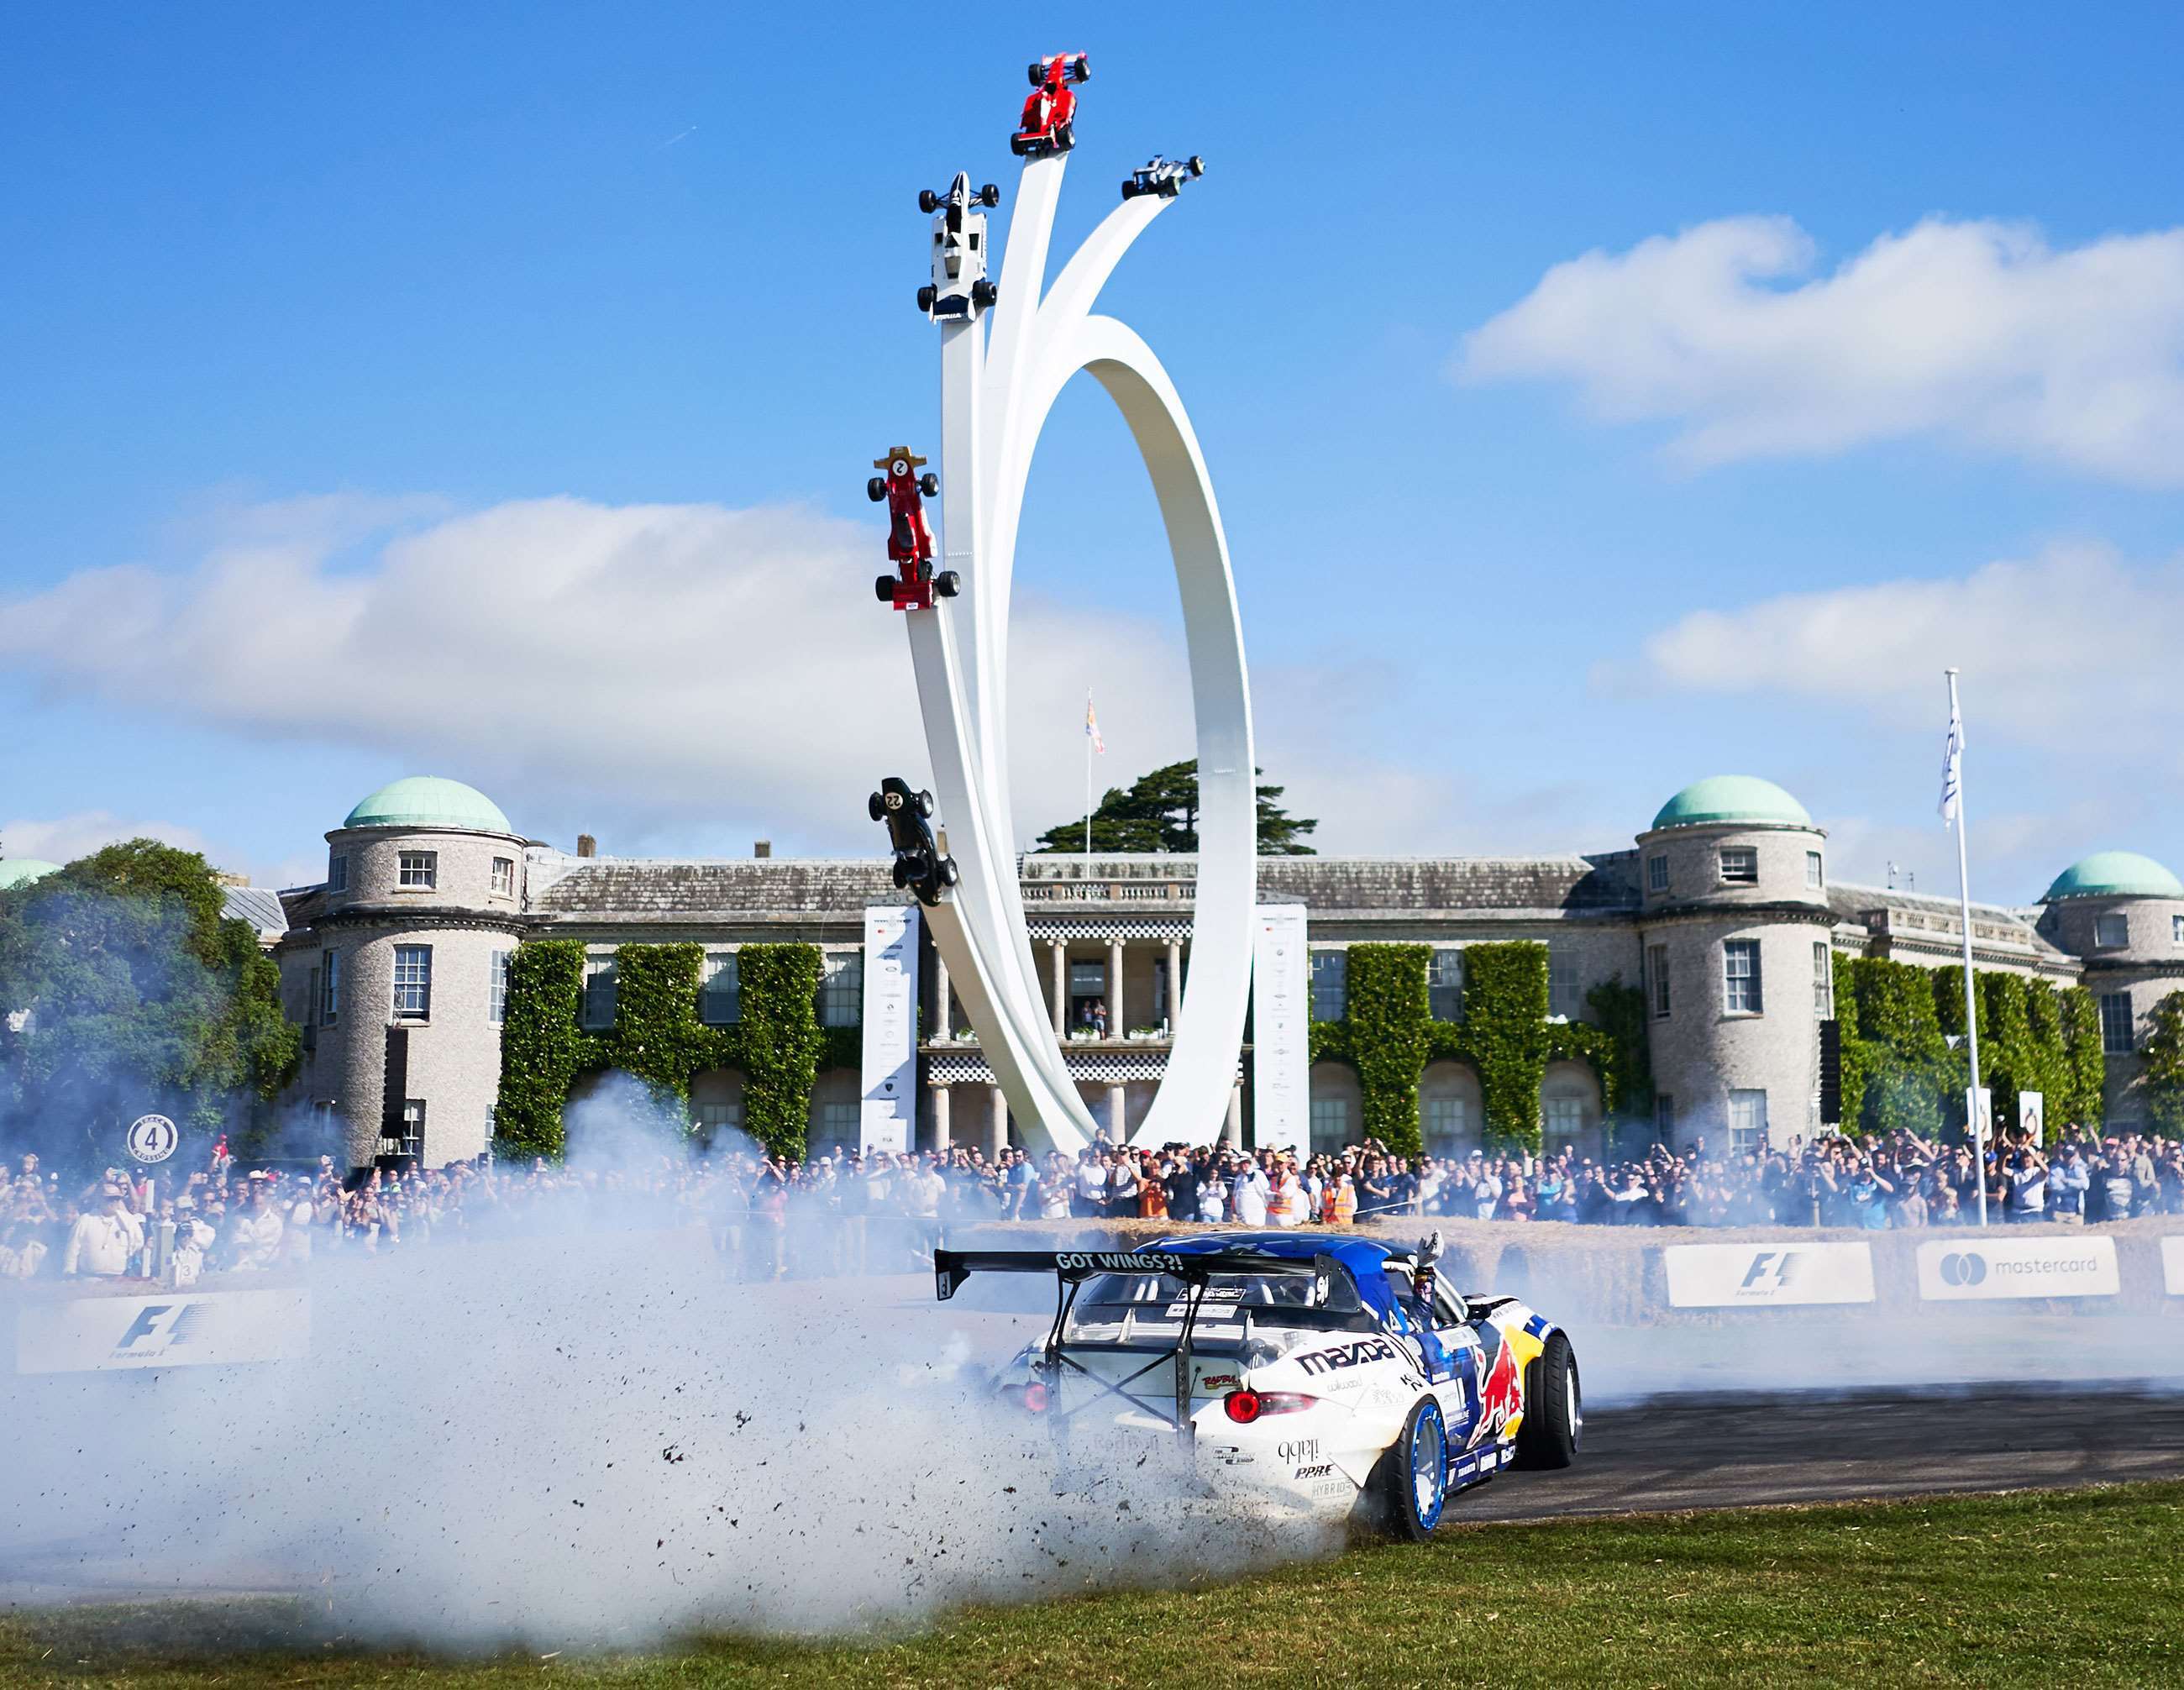 where-to-stand-at-the-festival-of-speed-goodwood-house-dominic-james-fos-2017-goodwood-30062021.jpg